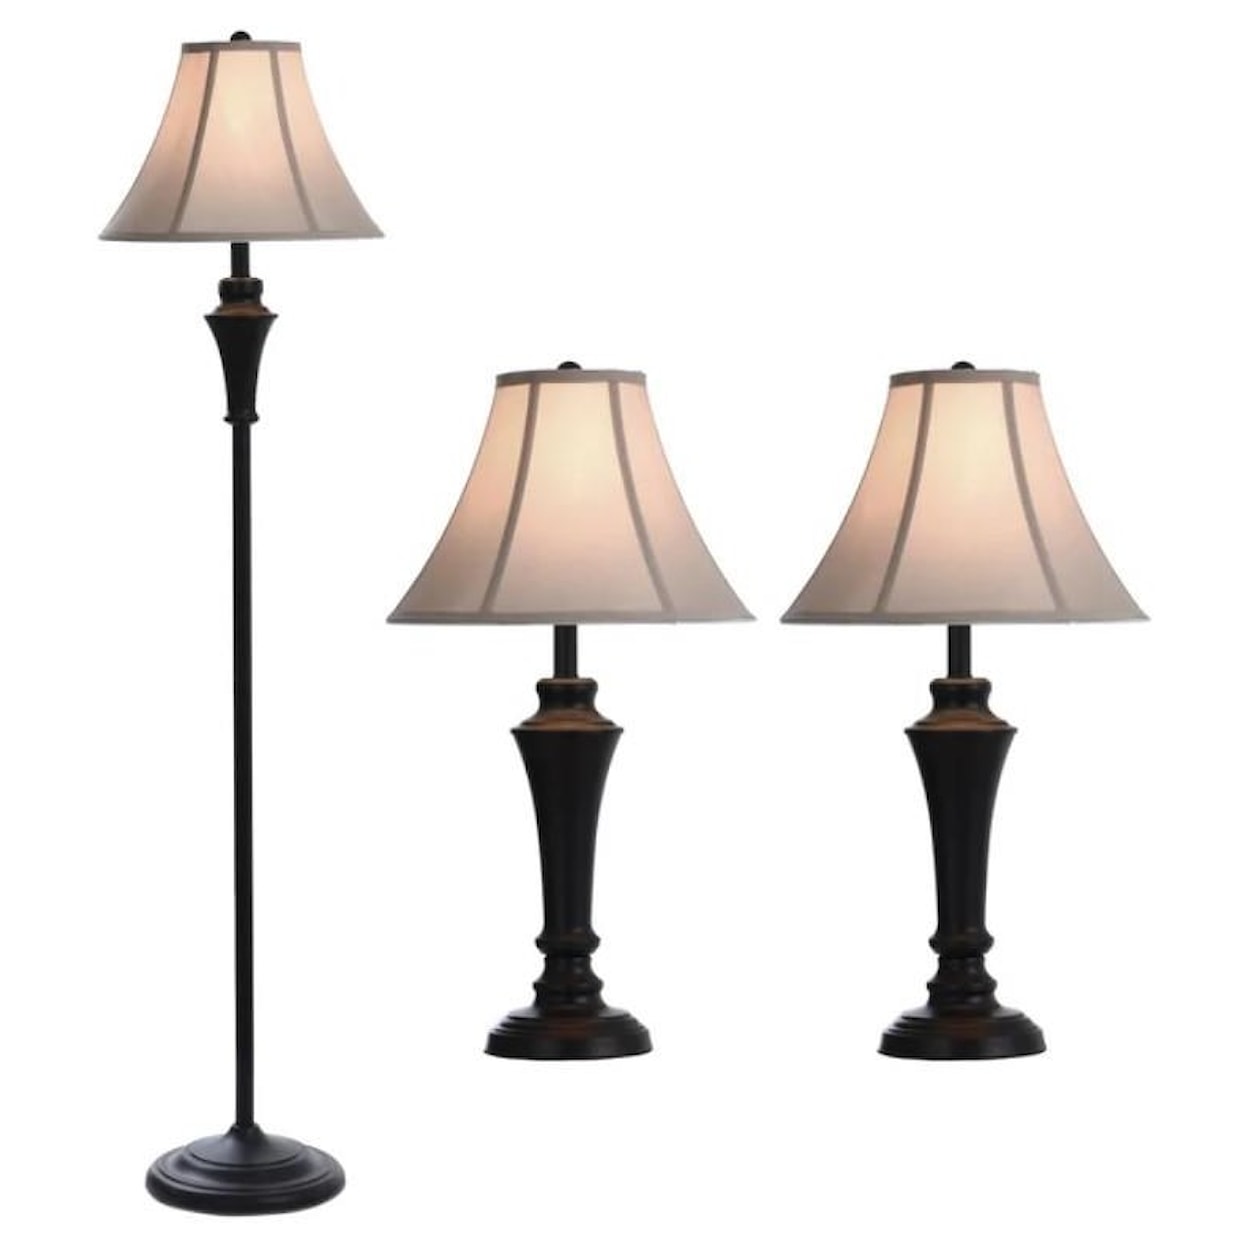 StyleCraft Lamps Set of 3 Lamps